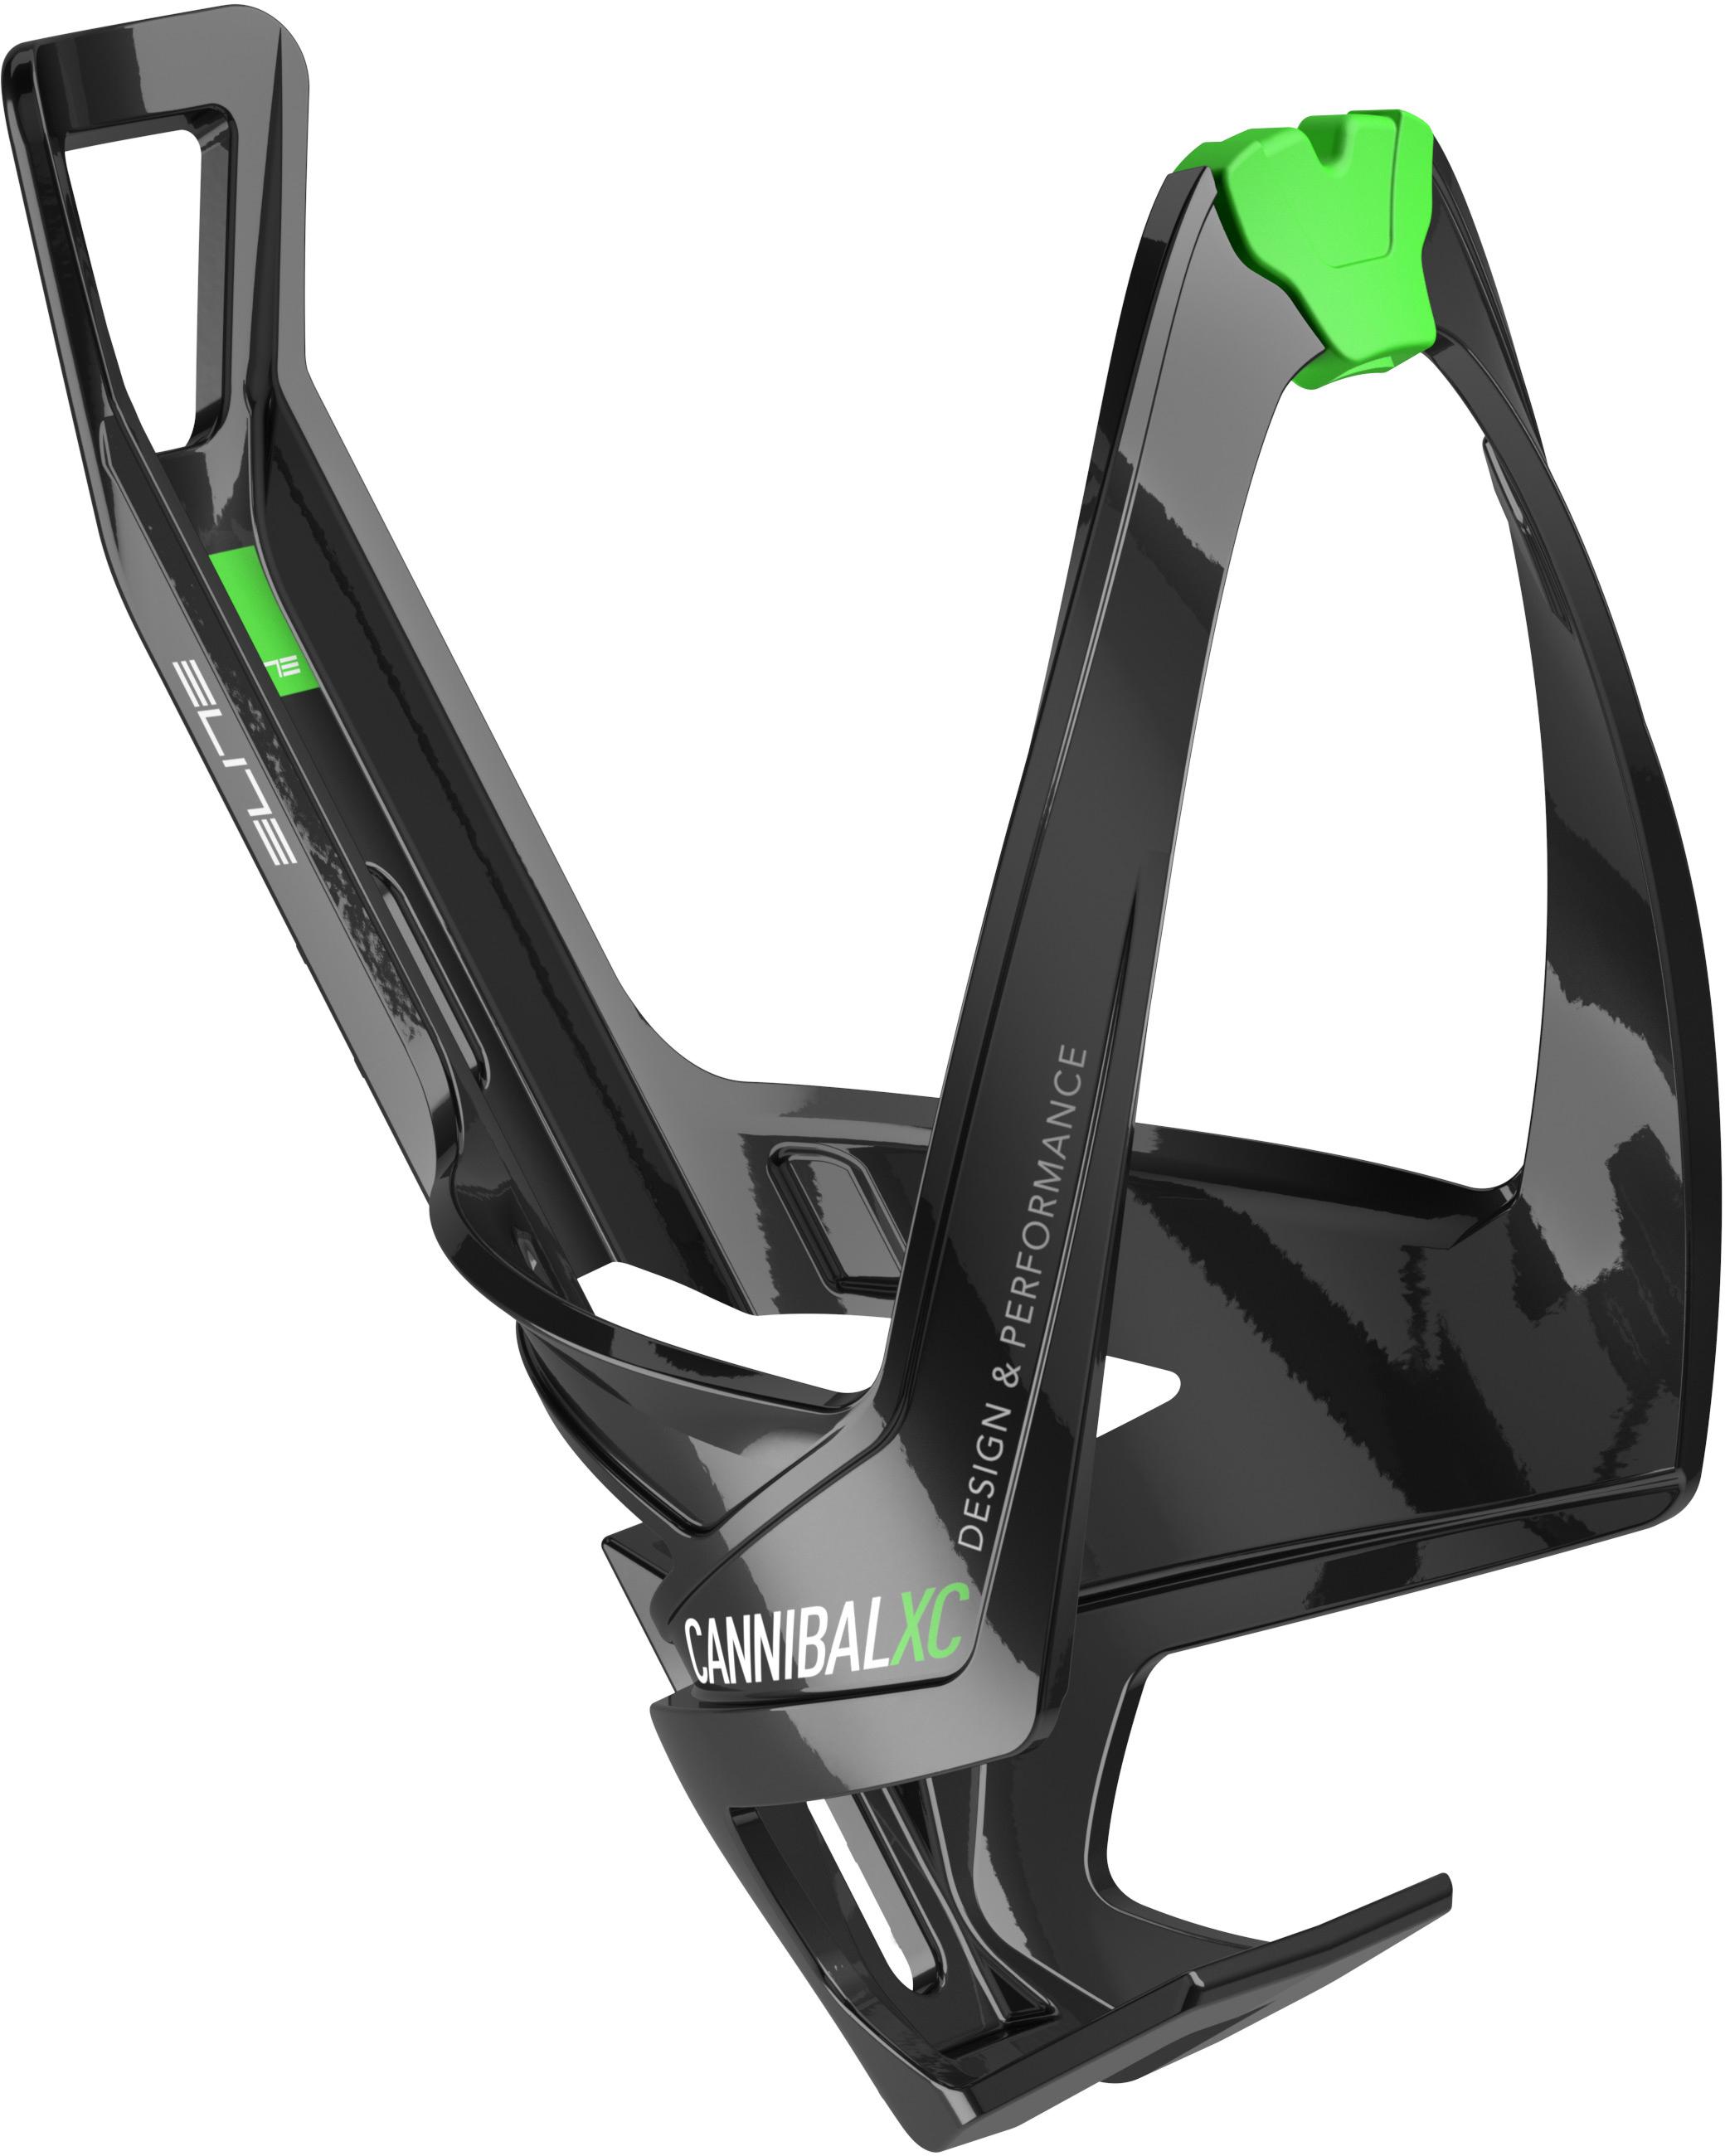 Cannibal Xc Bottle Cage Gloss Black / Green